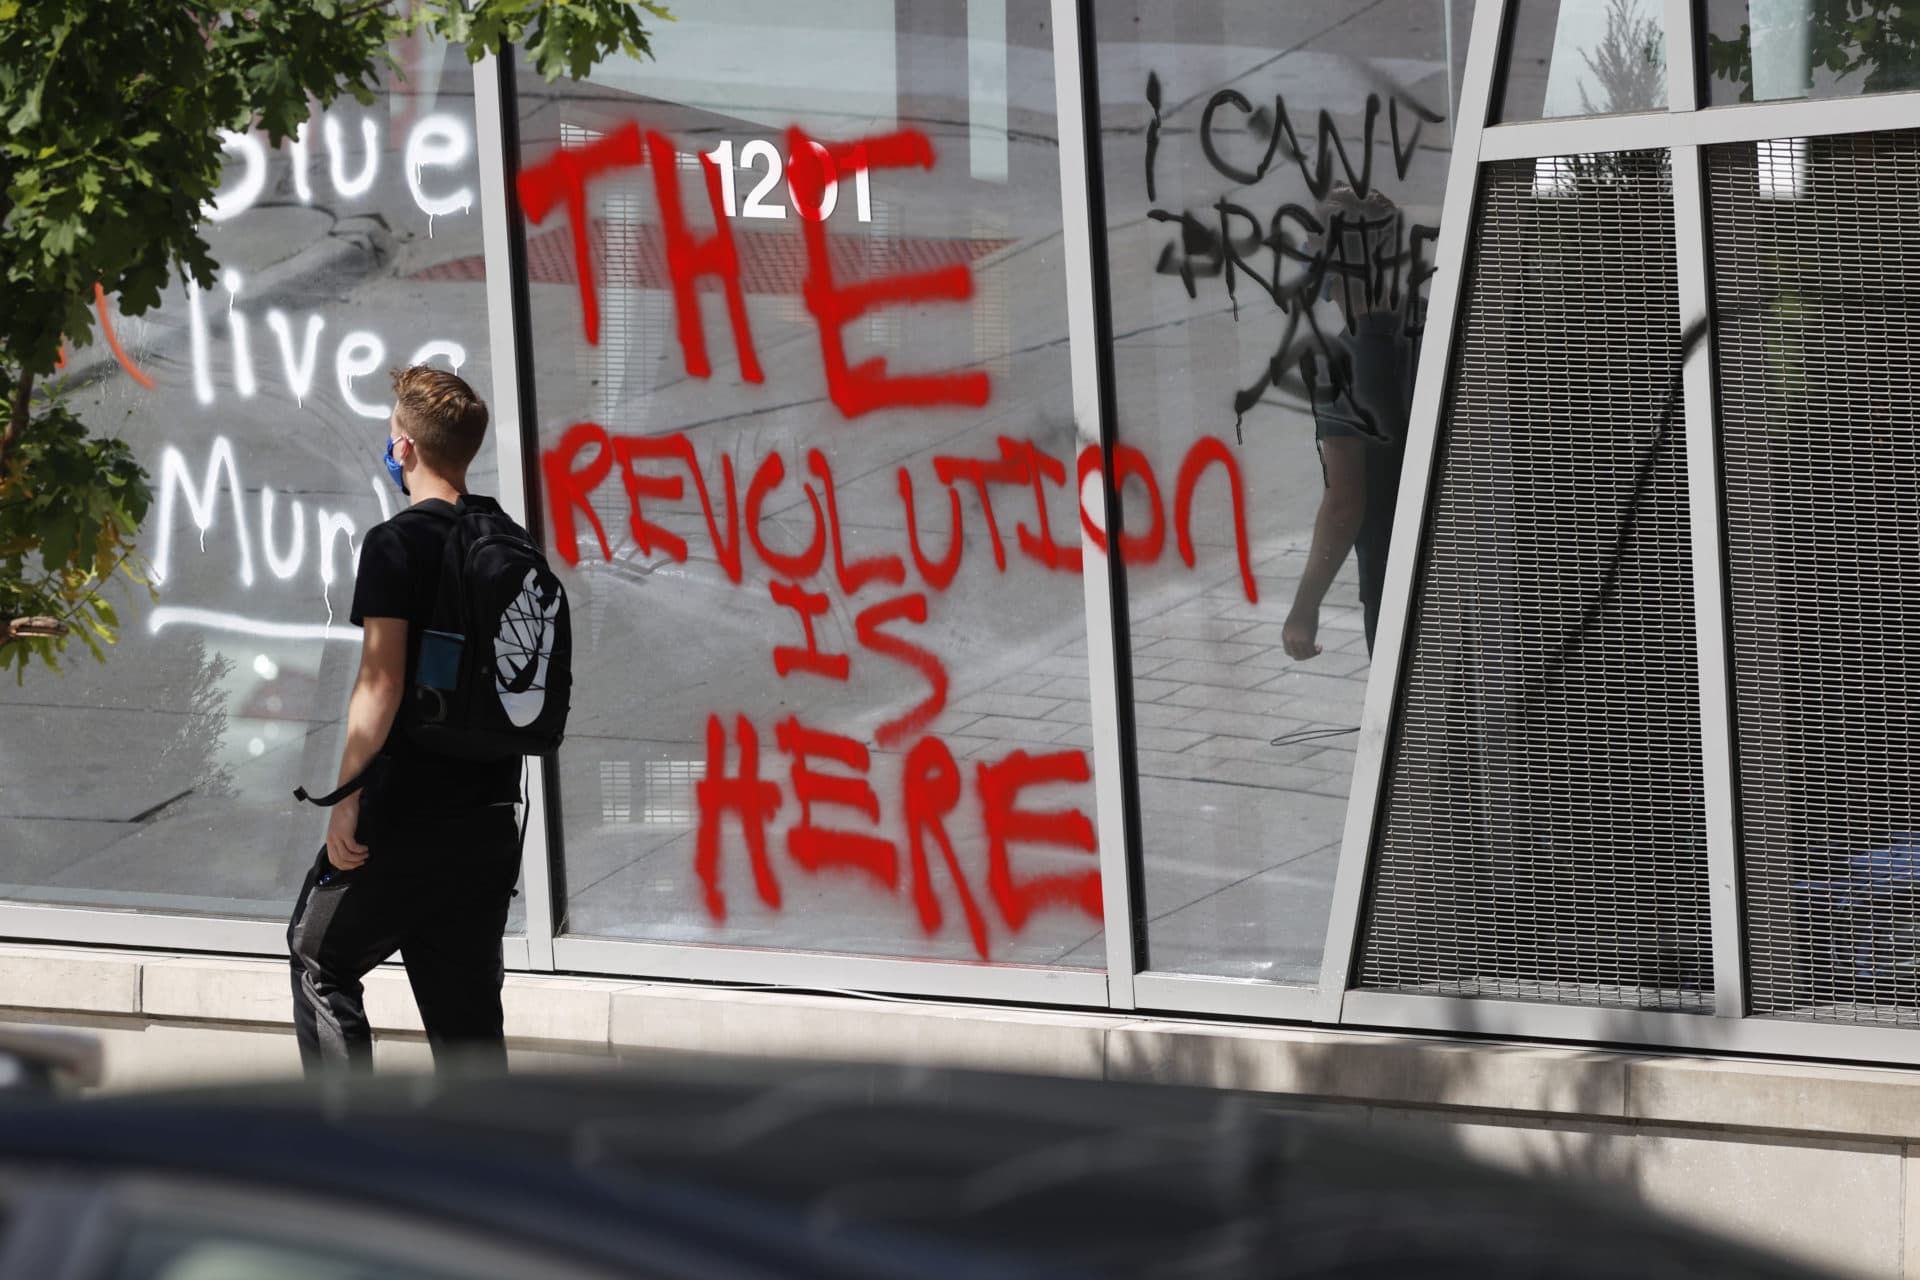 A pedestrian walks past graffiti sprayed on the windows of the ART Hotel in Denver on Sunday, May 31, 2020, during a protest over the death of Floyd, a black man who died after being restrained by Minneapolis police officers on May 25. (AP Photo/David Zalubowski)